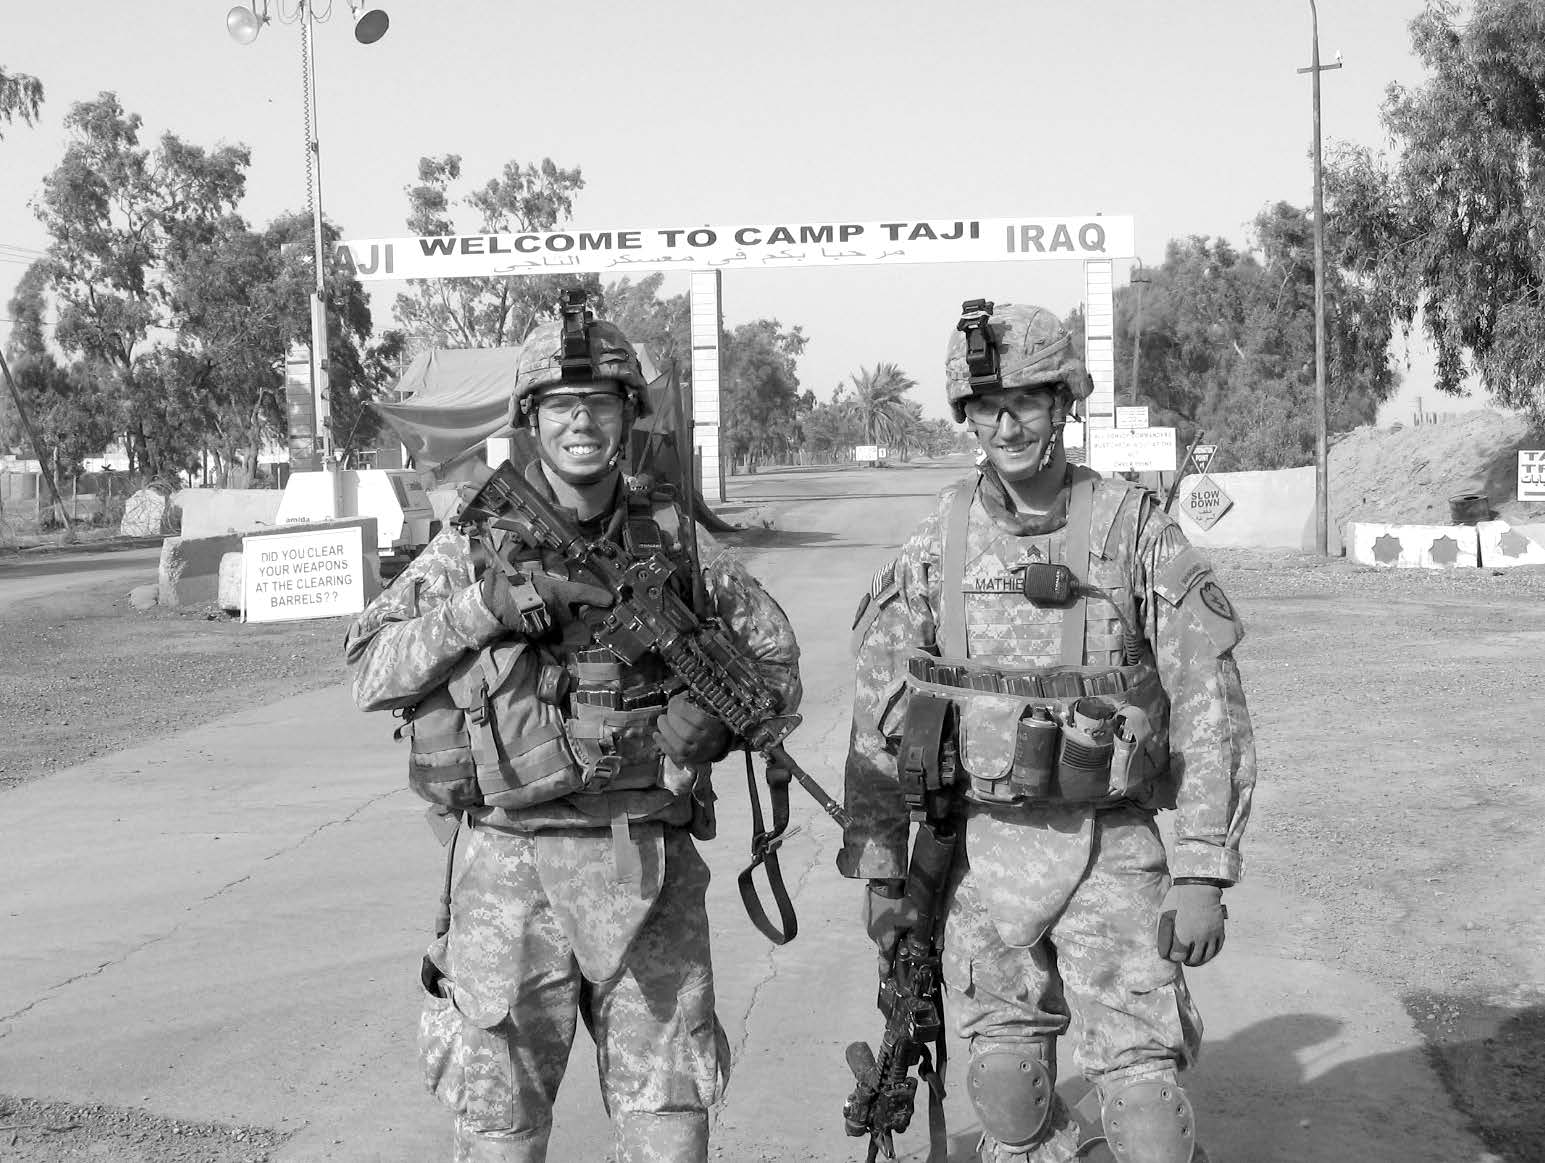 Captain Rick Pace (left) with one of his sergeants after completing a patrol near Camp Taji in Iraq. Courtesy of Rick Pace.